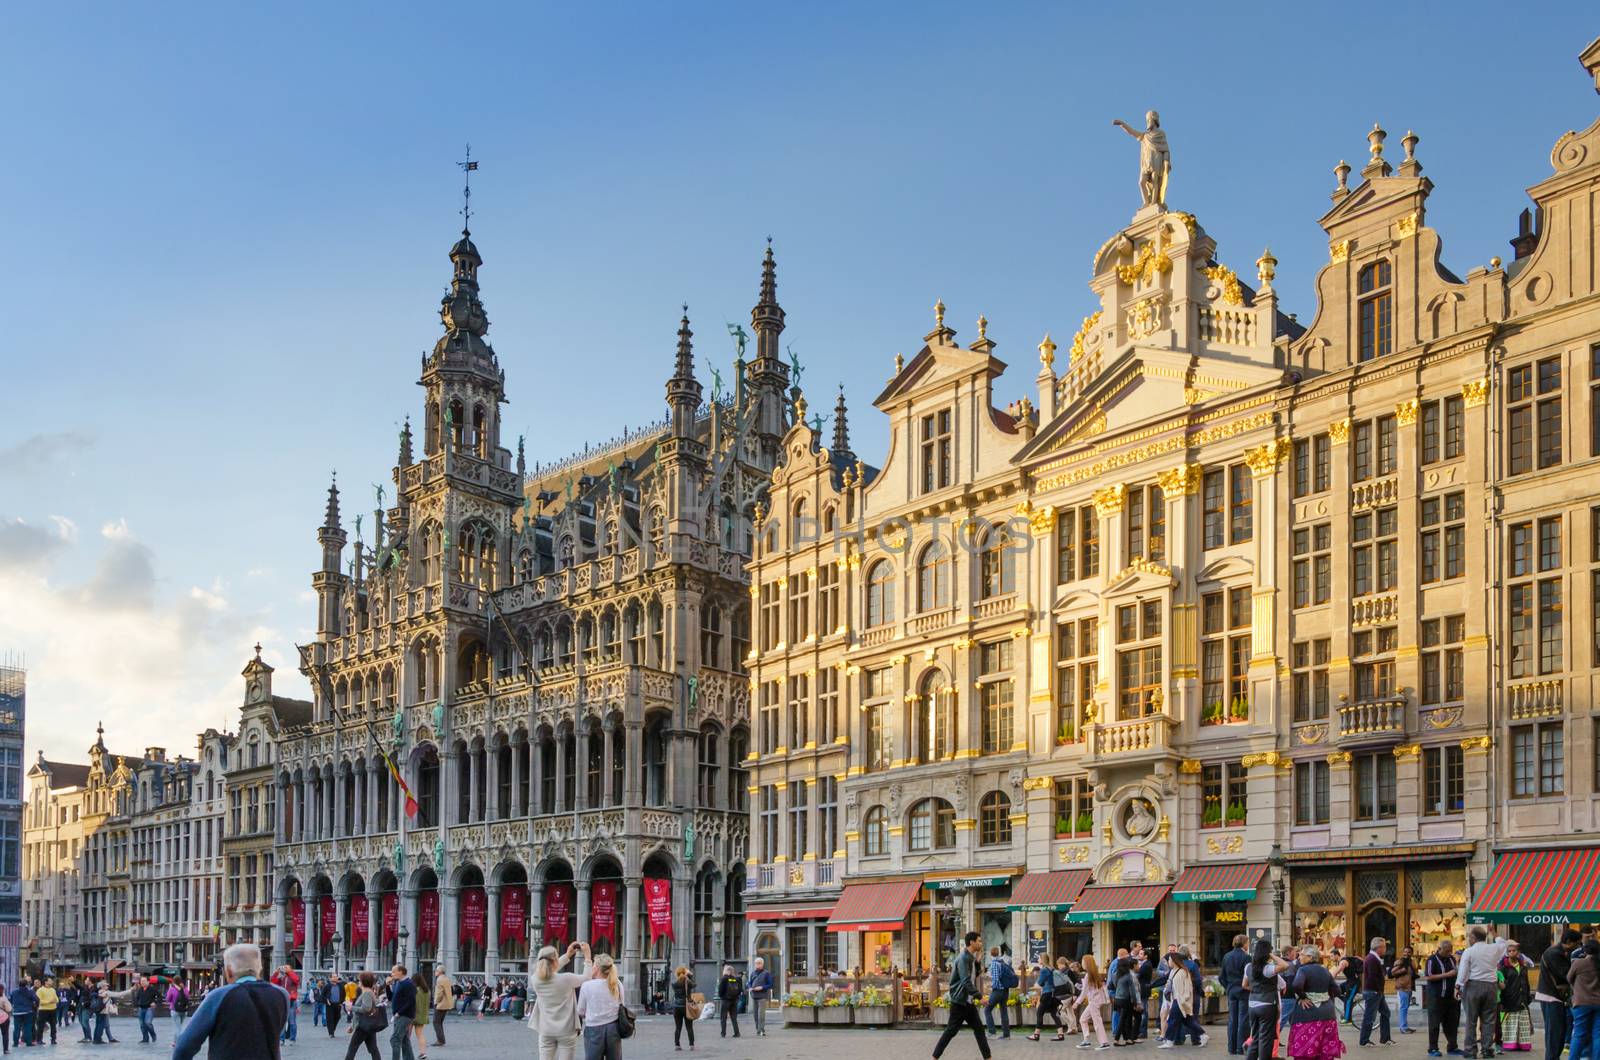 Brussels, Belgium - May 13, 2015: Many tourists visiting famous Grand Place the central square of Brussels by siraanamwong